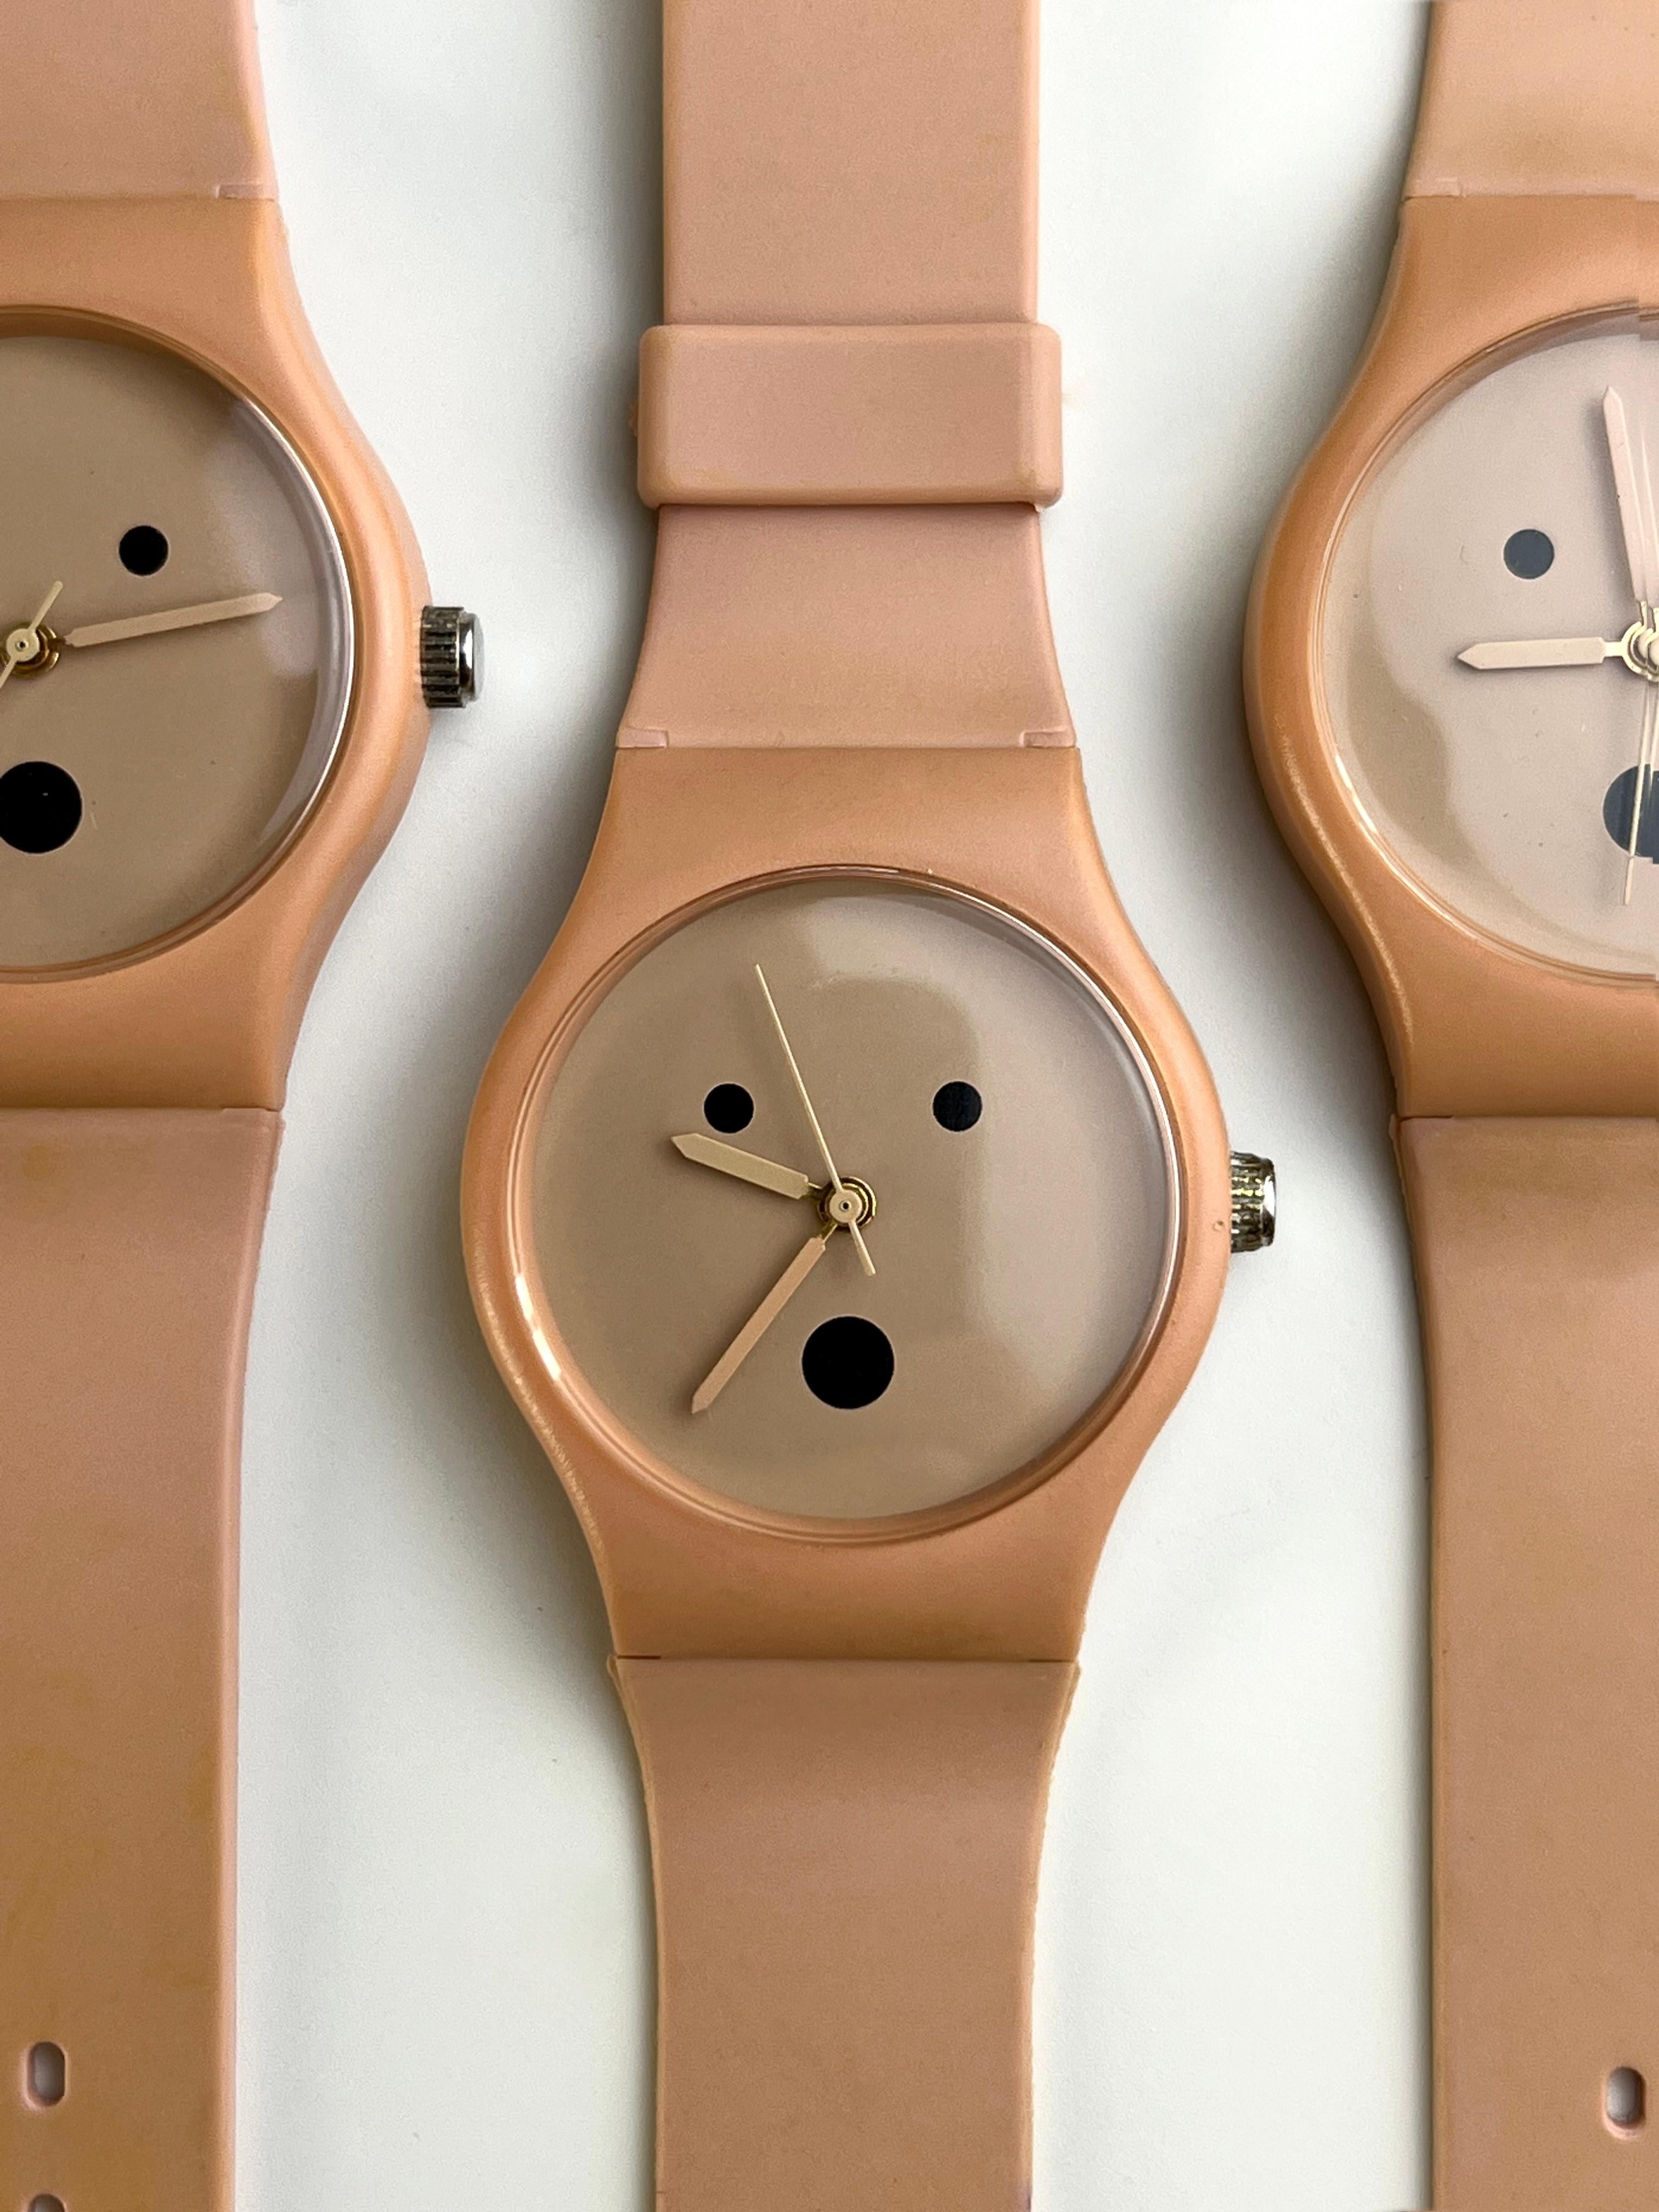 Alessandro Mendini's wristwatch, crafted during the 1990s for the Museo Alchimia, served as a pioneering prototype for Swatch, a renowned company for which Mendini created numerous timepieces in that era. Fashioned from vintage pink rubber and